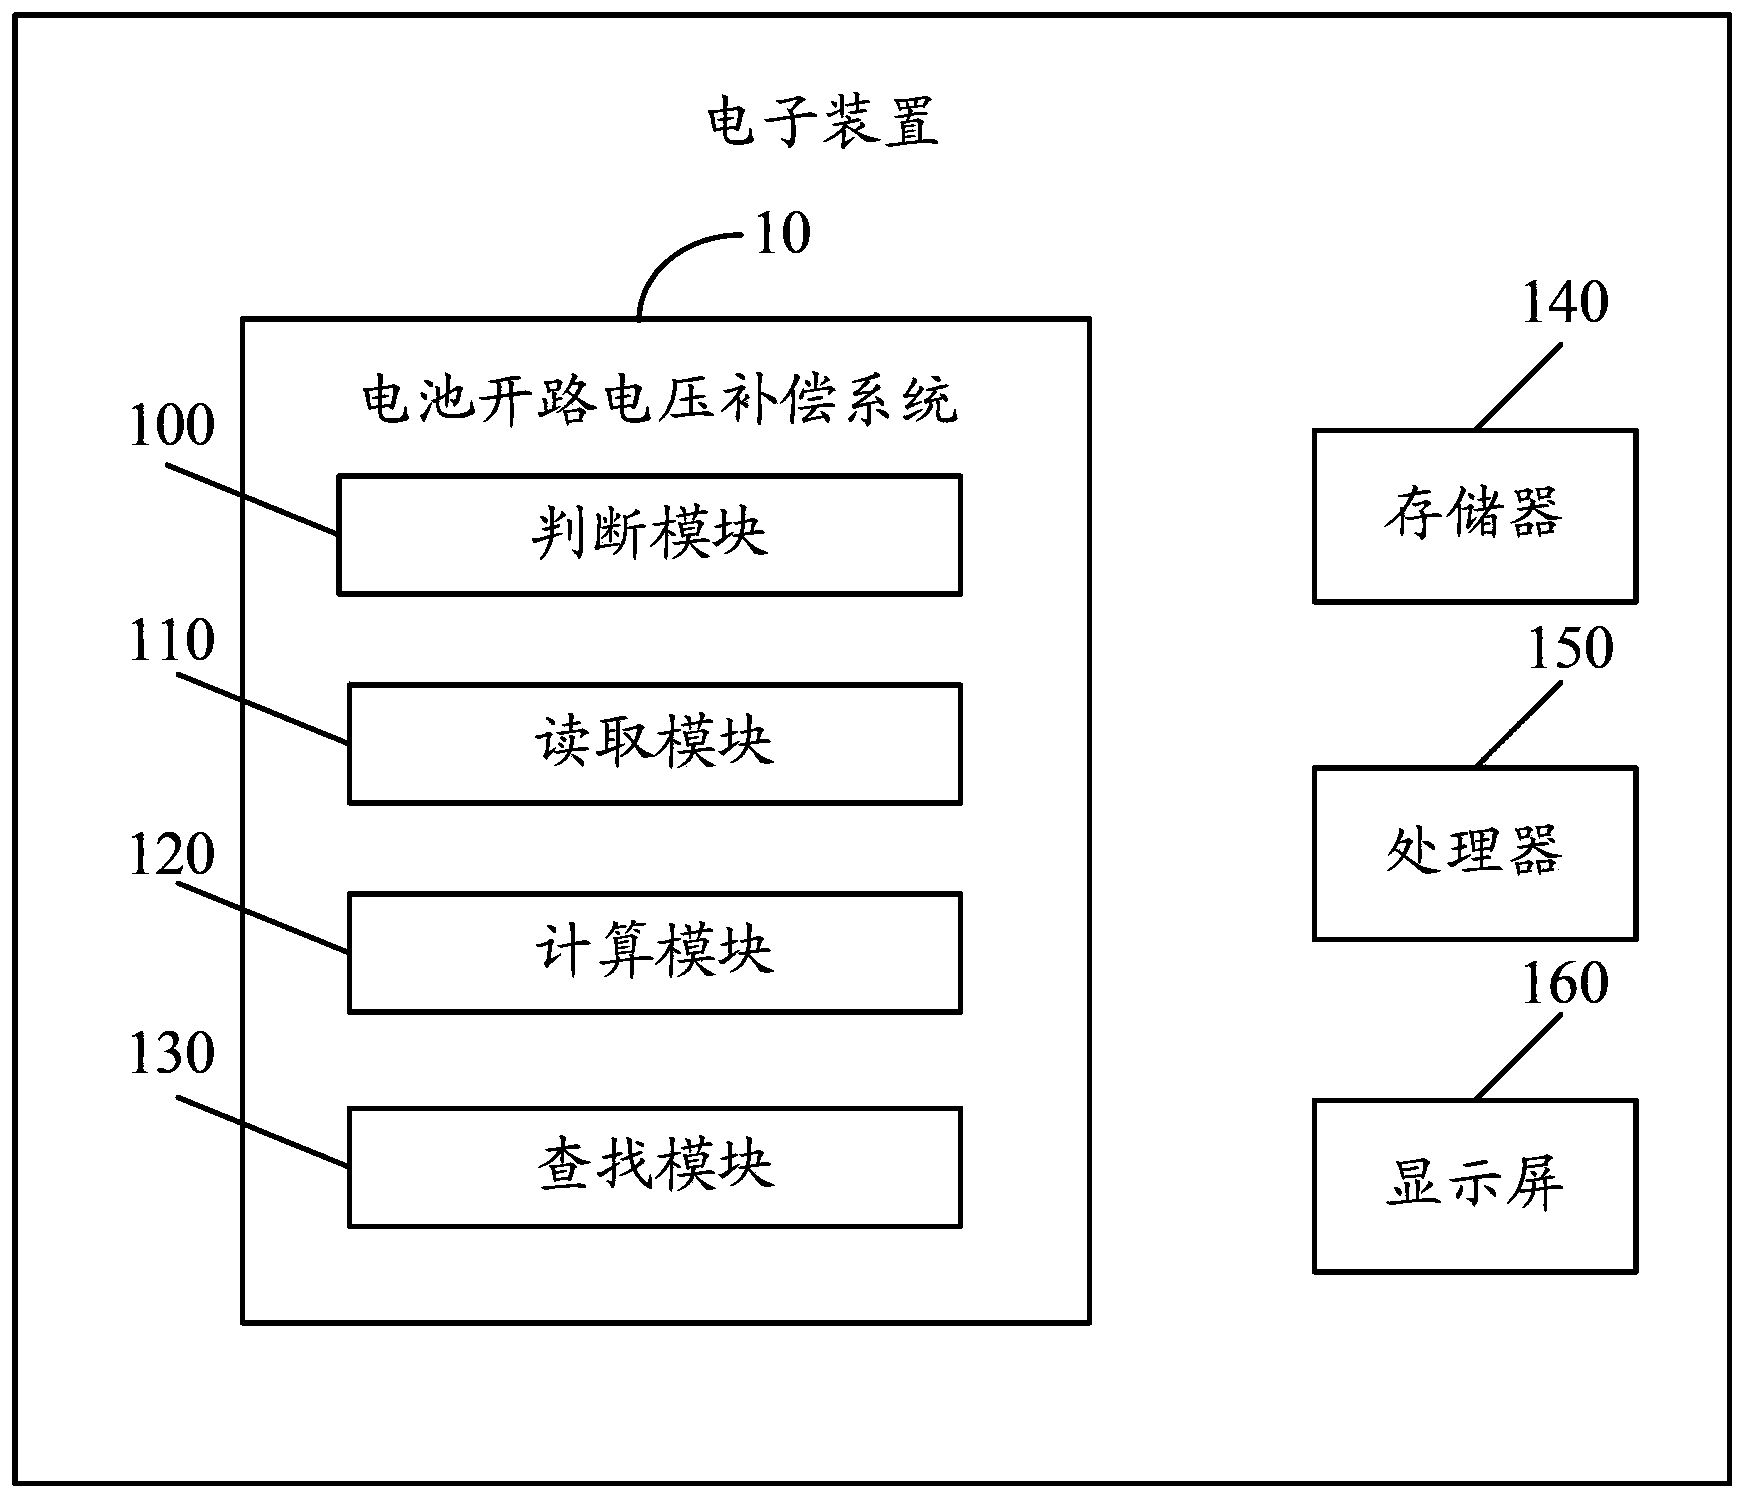 Cell open-circuit voltage compensation system and cell open-circuit voltage compensation method